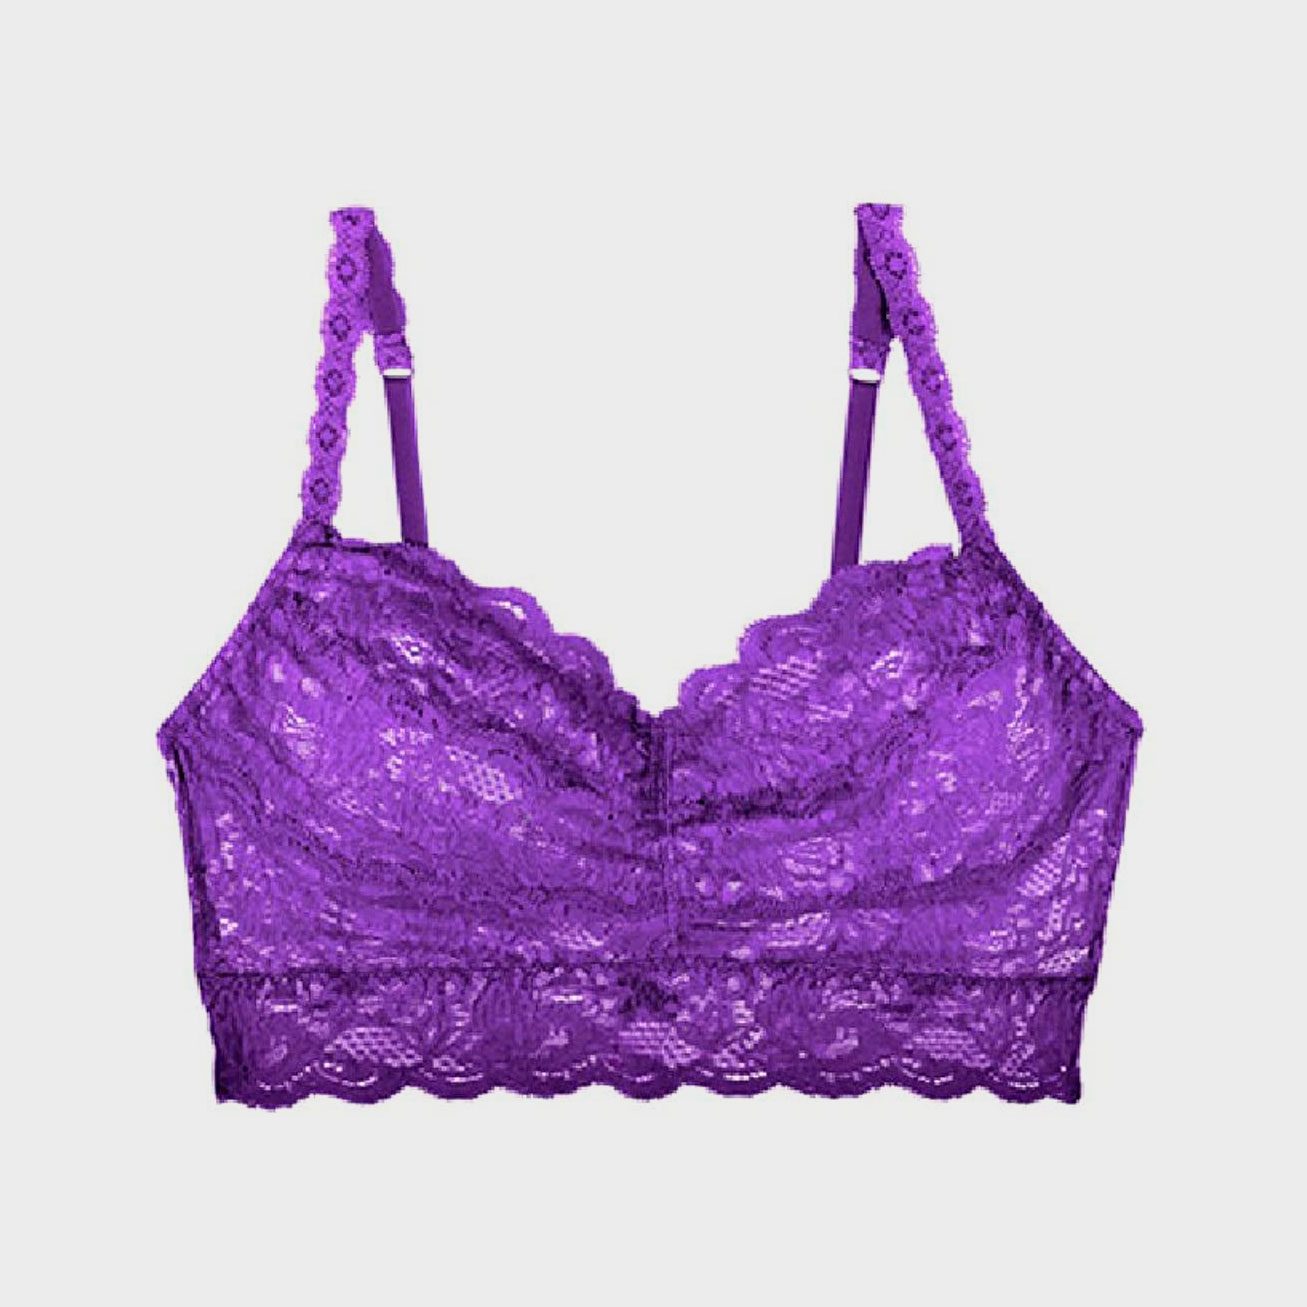 Our lingerie expert reveals the five staple bras which every woman